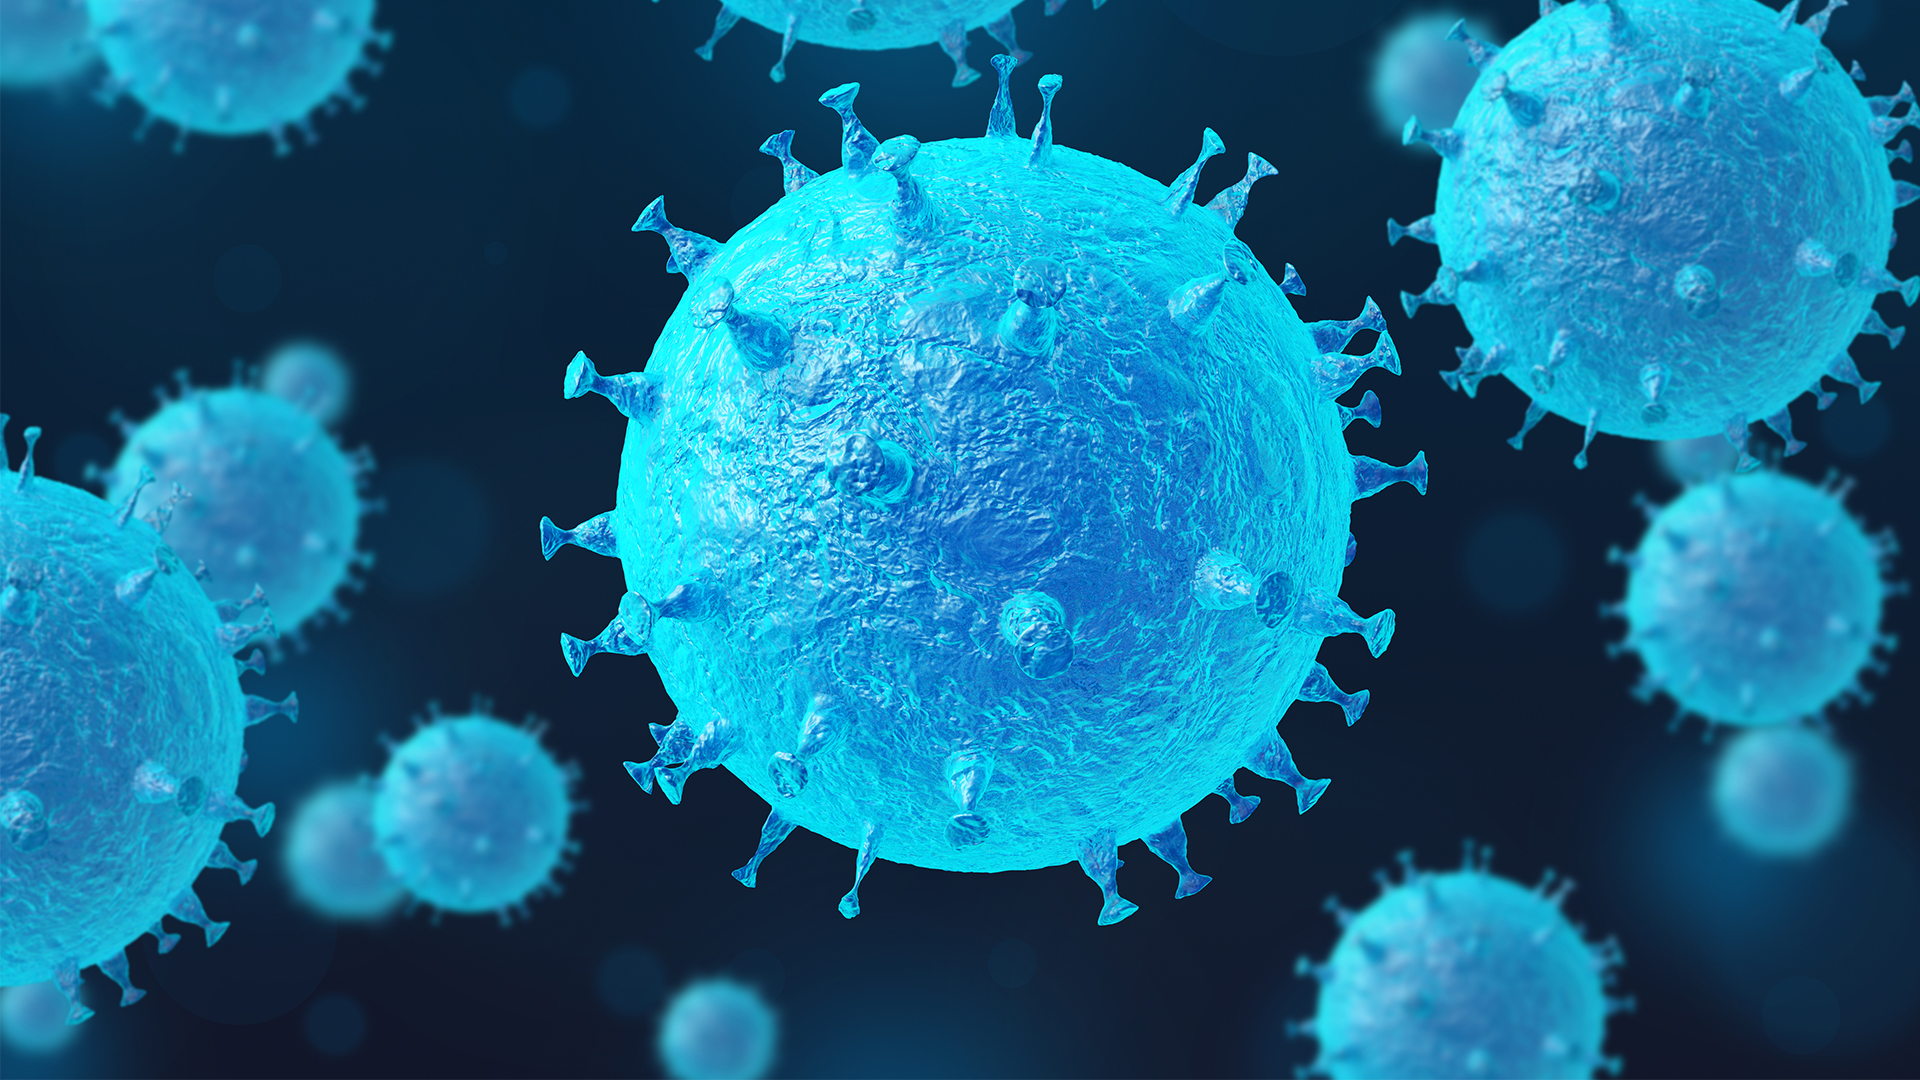 Light blue, spiky spheres float amongst a dark blue background, which is meant to represent a virus in the body.